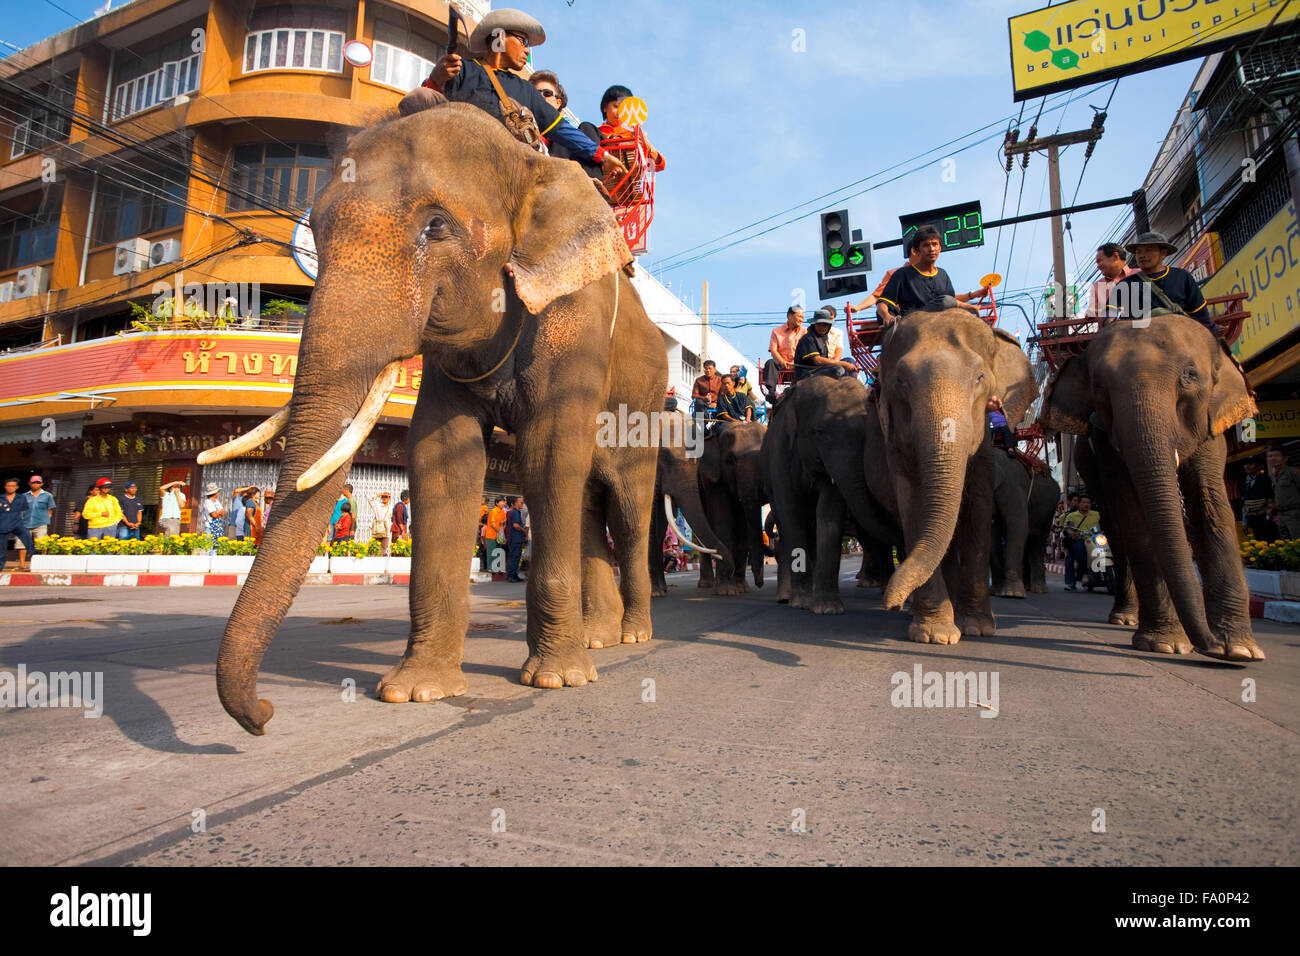 Herd of elephants and riding tourist passengers marching in downtown Surin during the annual Surin Elephant Roundup parade Stock Photo